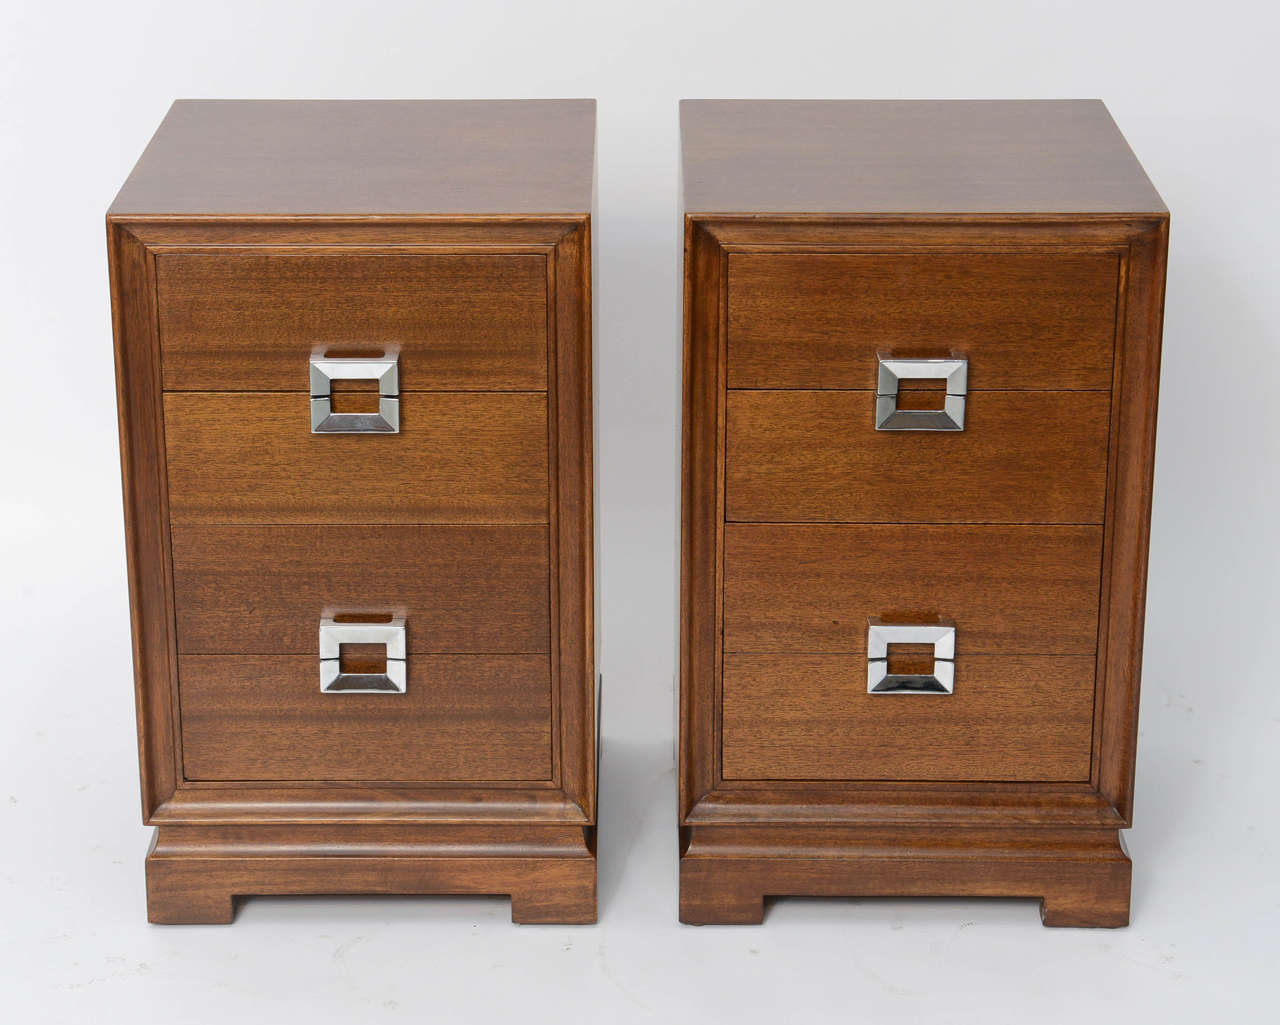 A pair of 1940s Paul Frankl style mahogany nightstands providing great storage by the noted Red Lion Table Co. of Red Lion, PA. Polished nickel handles and strong, yet simple lines rule.  Founded in 1907 Red Lion produced pieces of exceptional